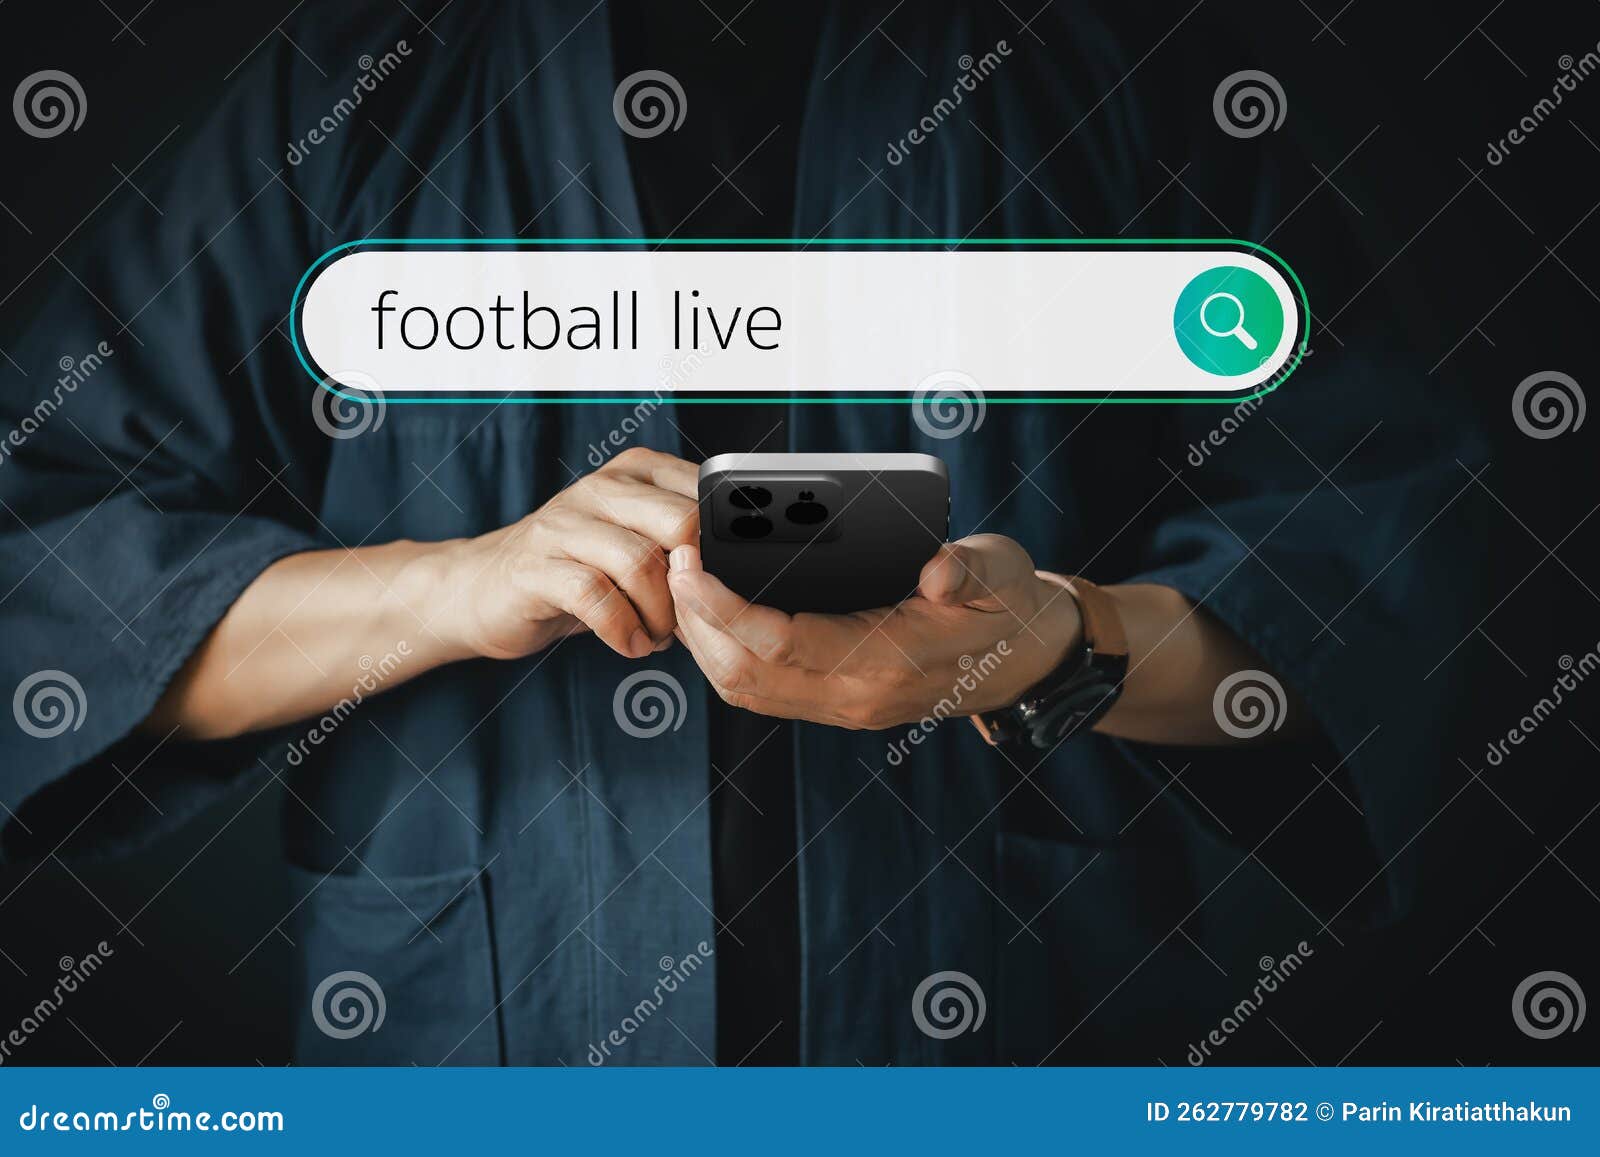 Man Using a Smartphone in the Room for Searching Football Live on Internet